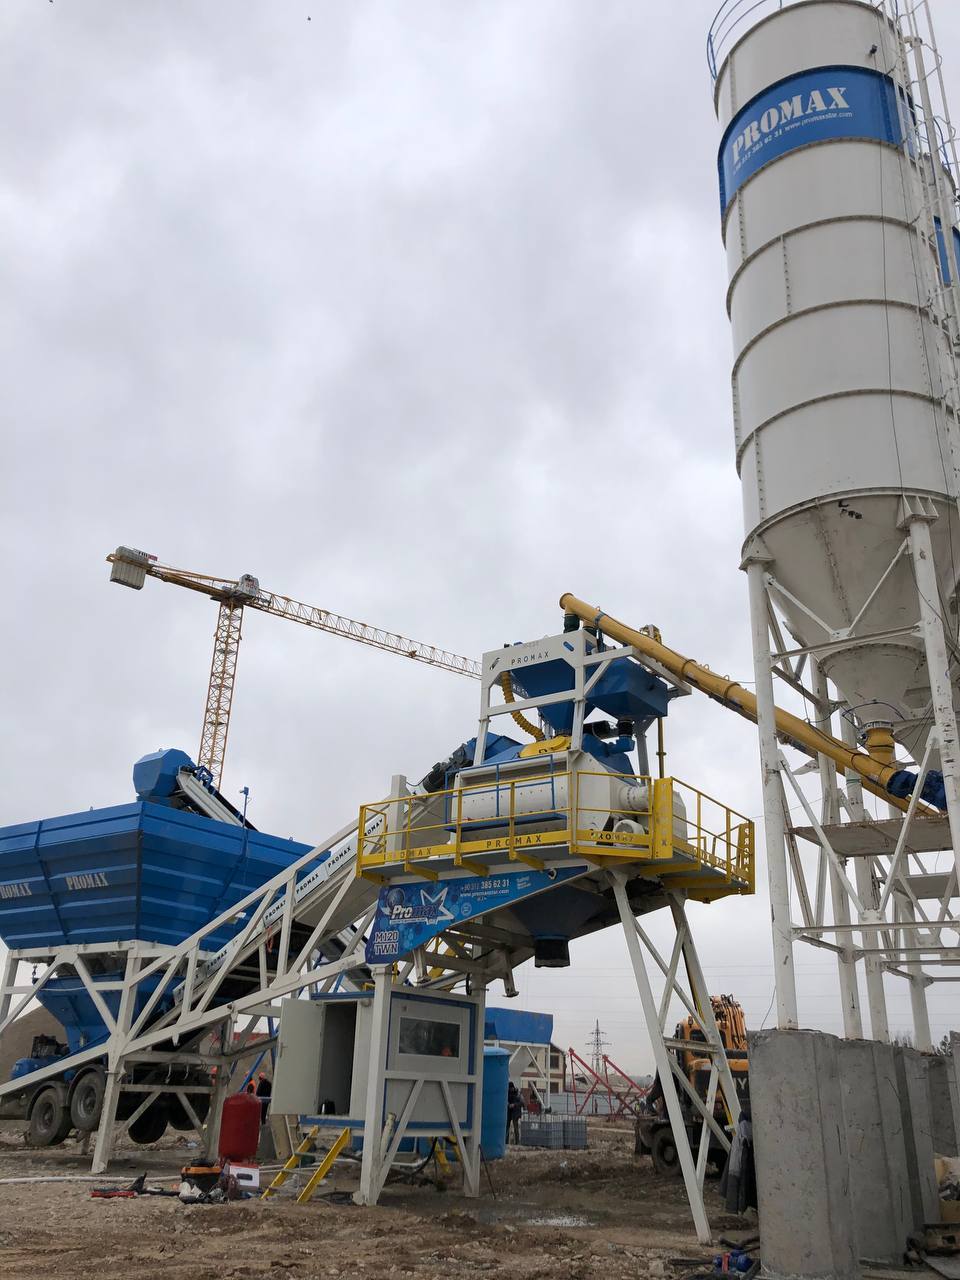 PROMAX Concrete Batching Plants undefined: фото 41